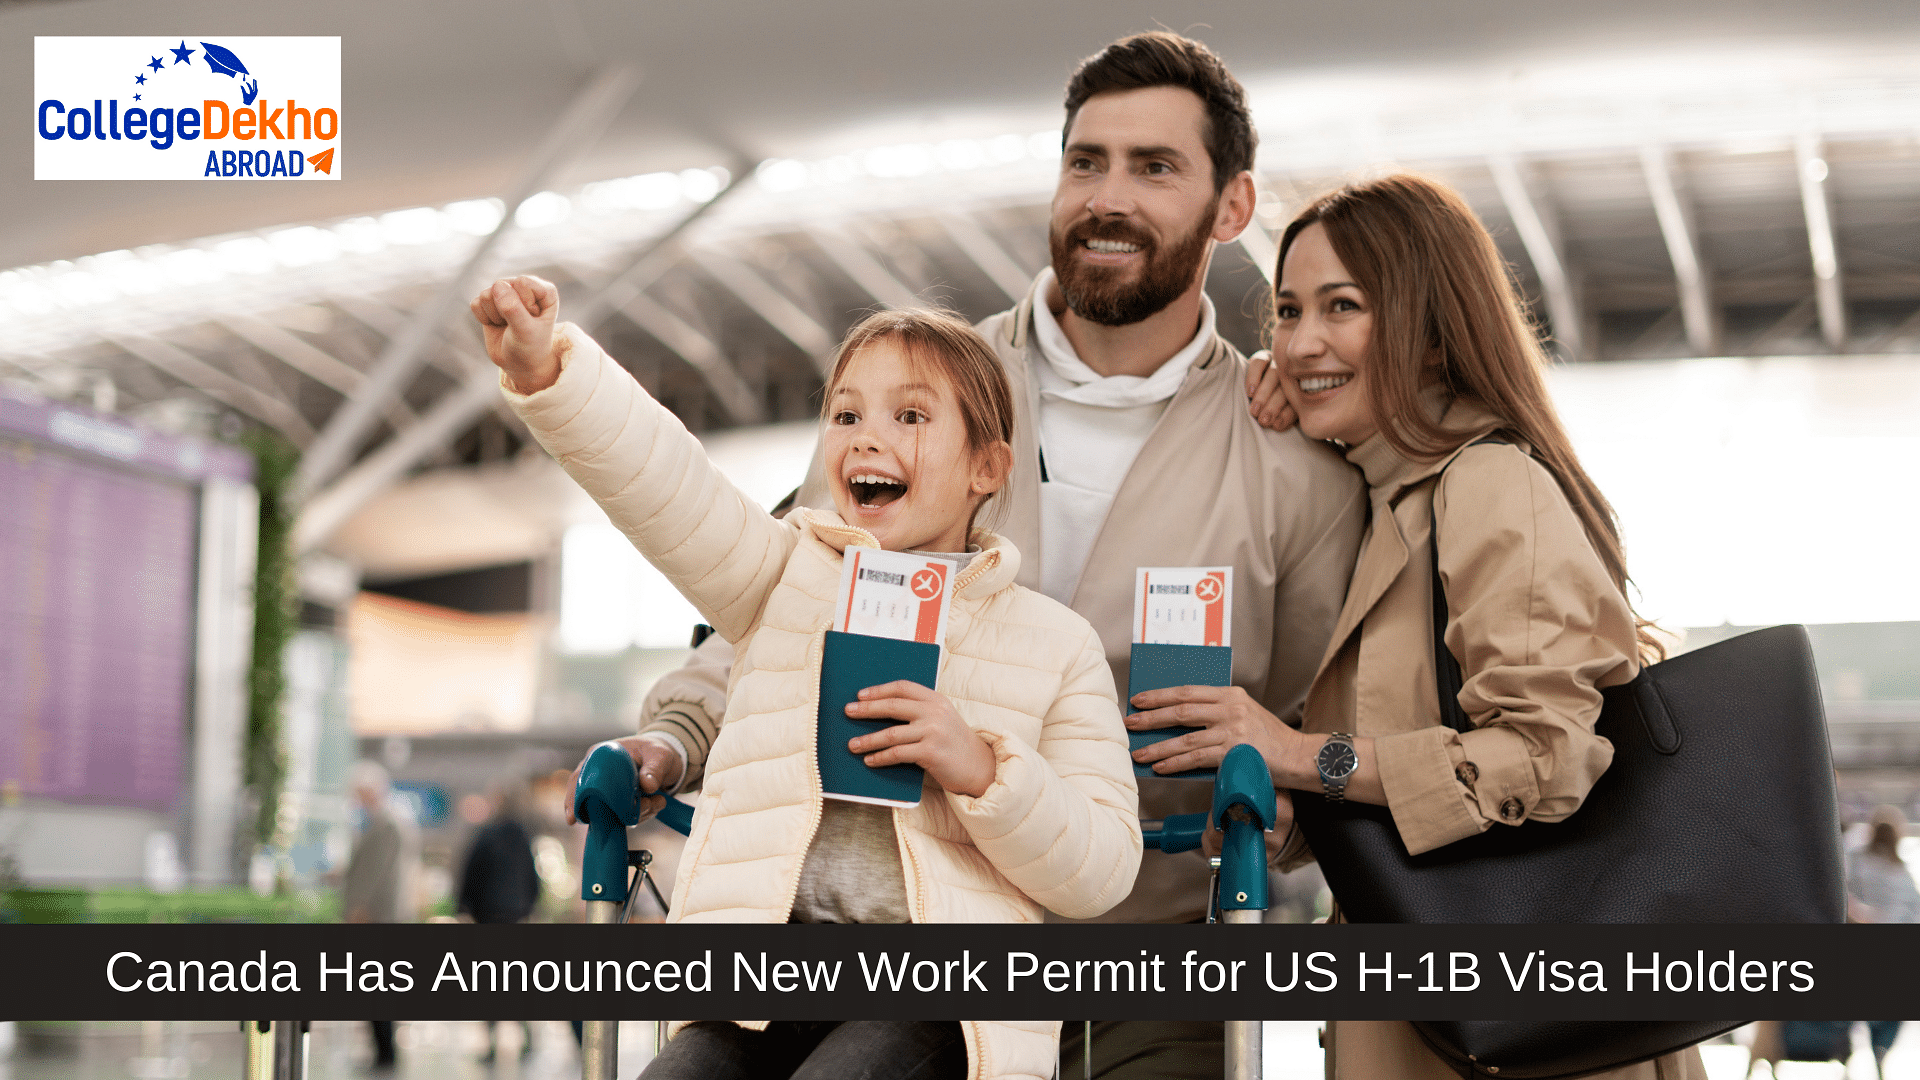 Canada's New Work Permit for US H-1B Visa Holders